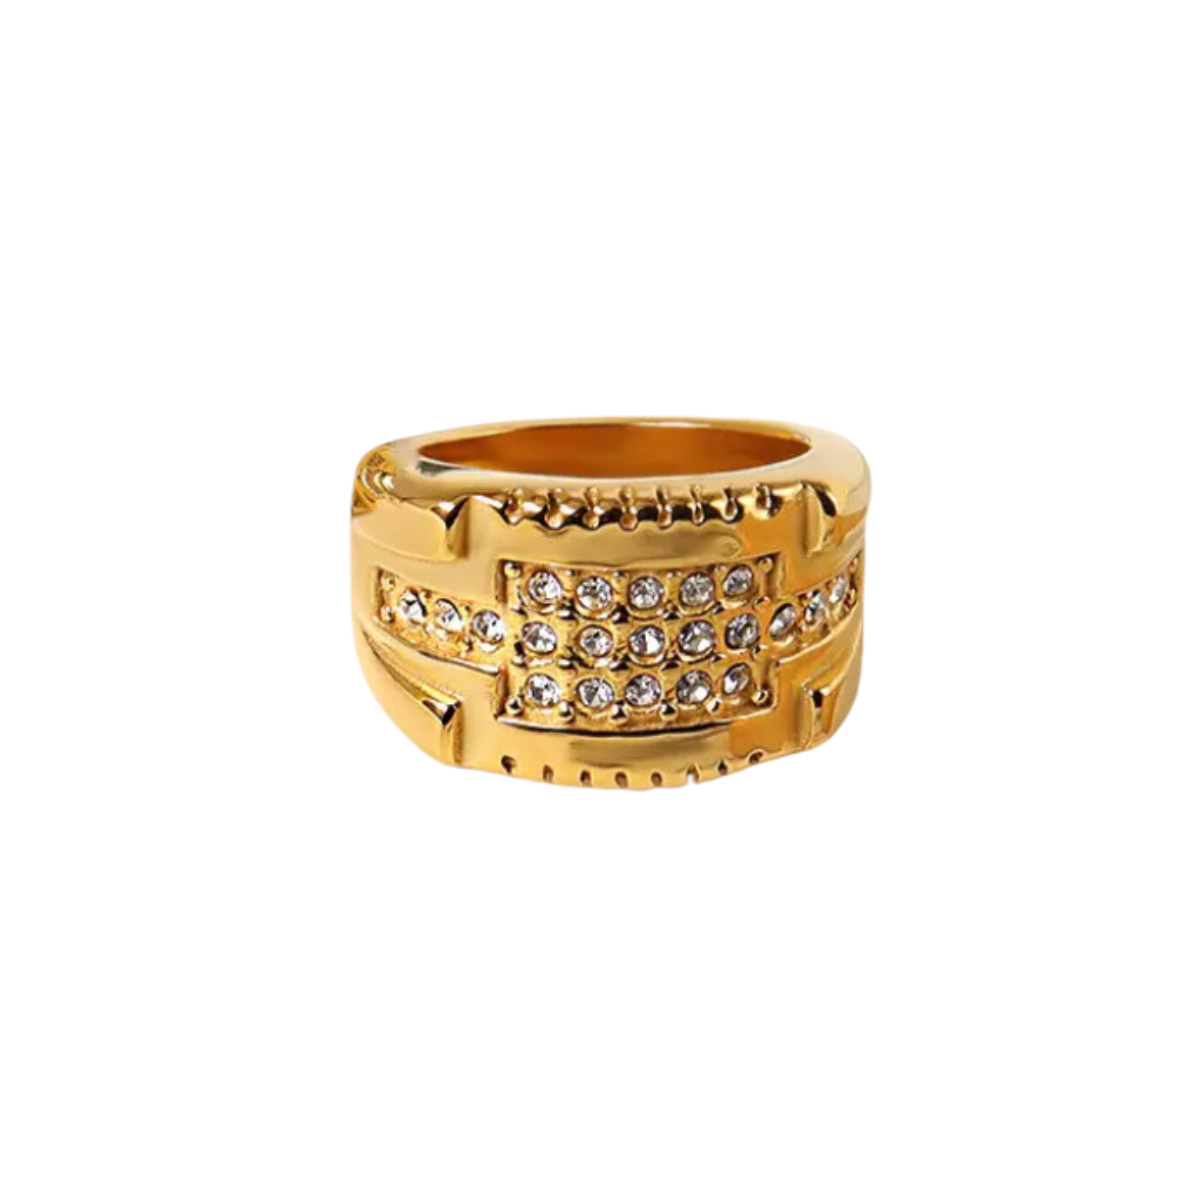 Presley 18k Gold Plated Ring